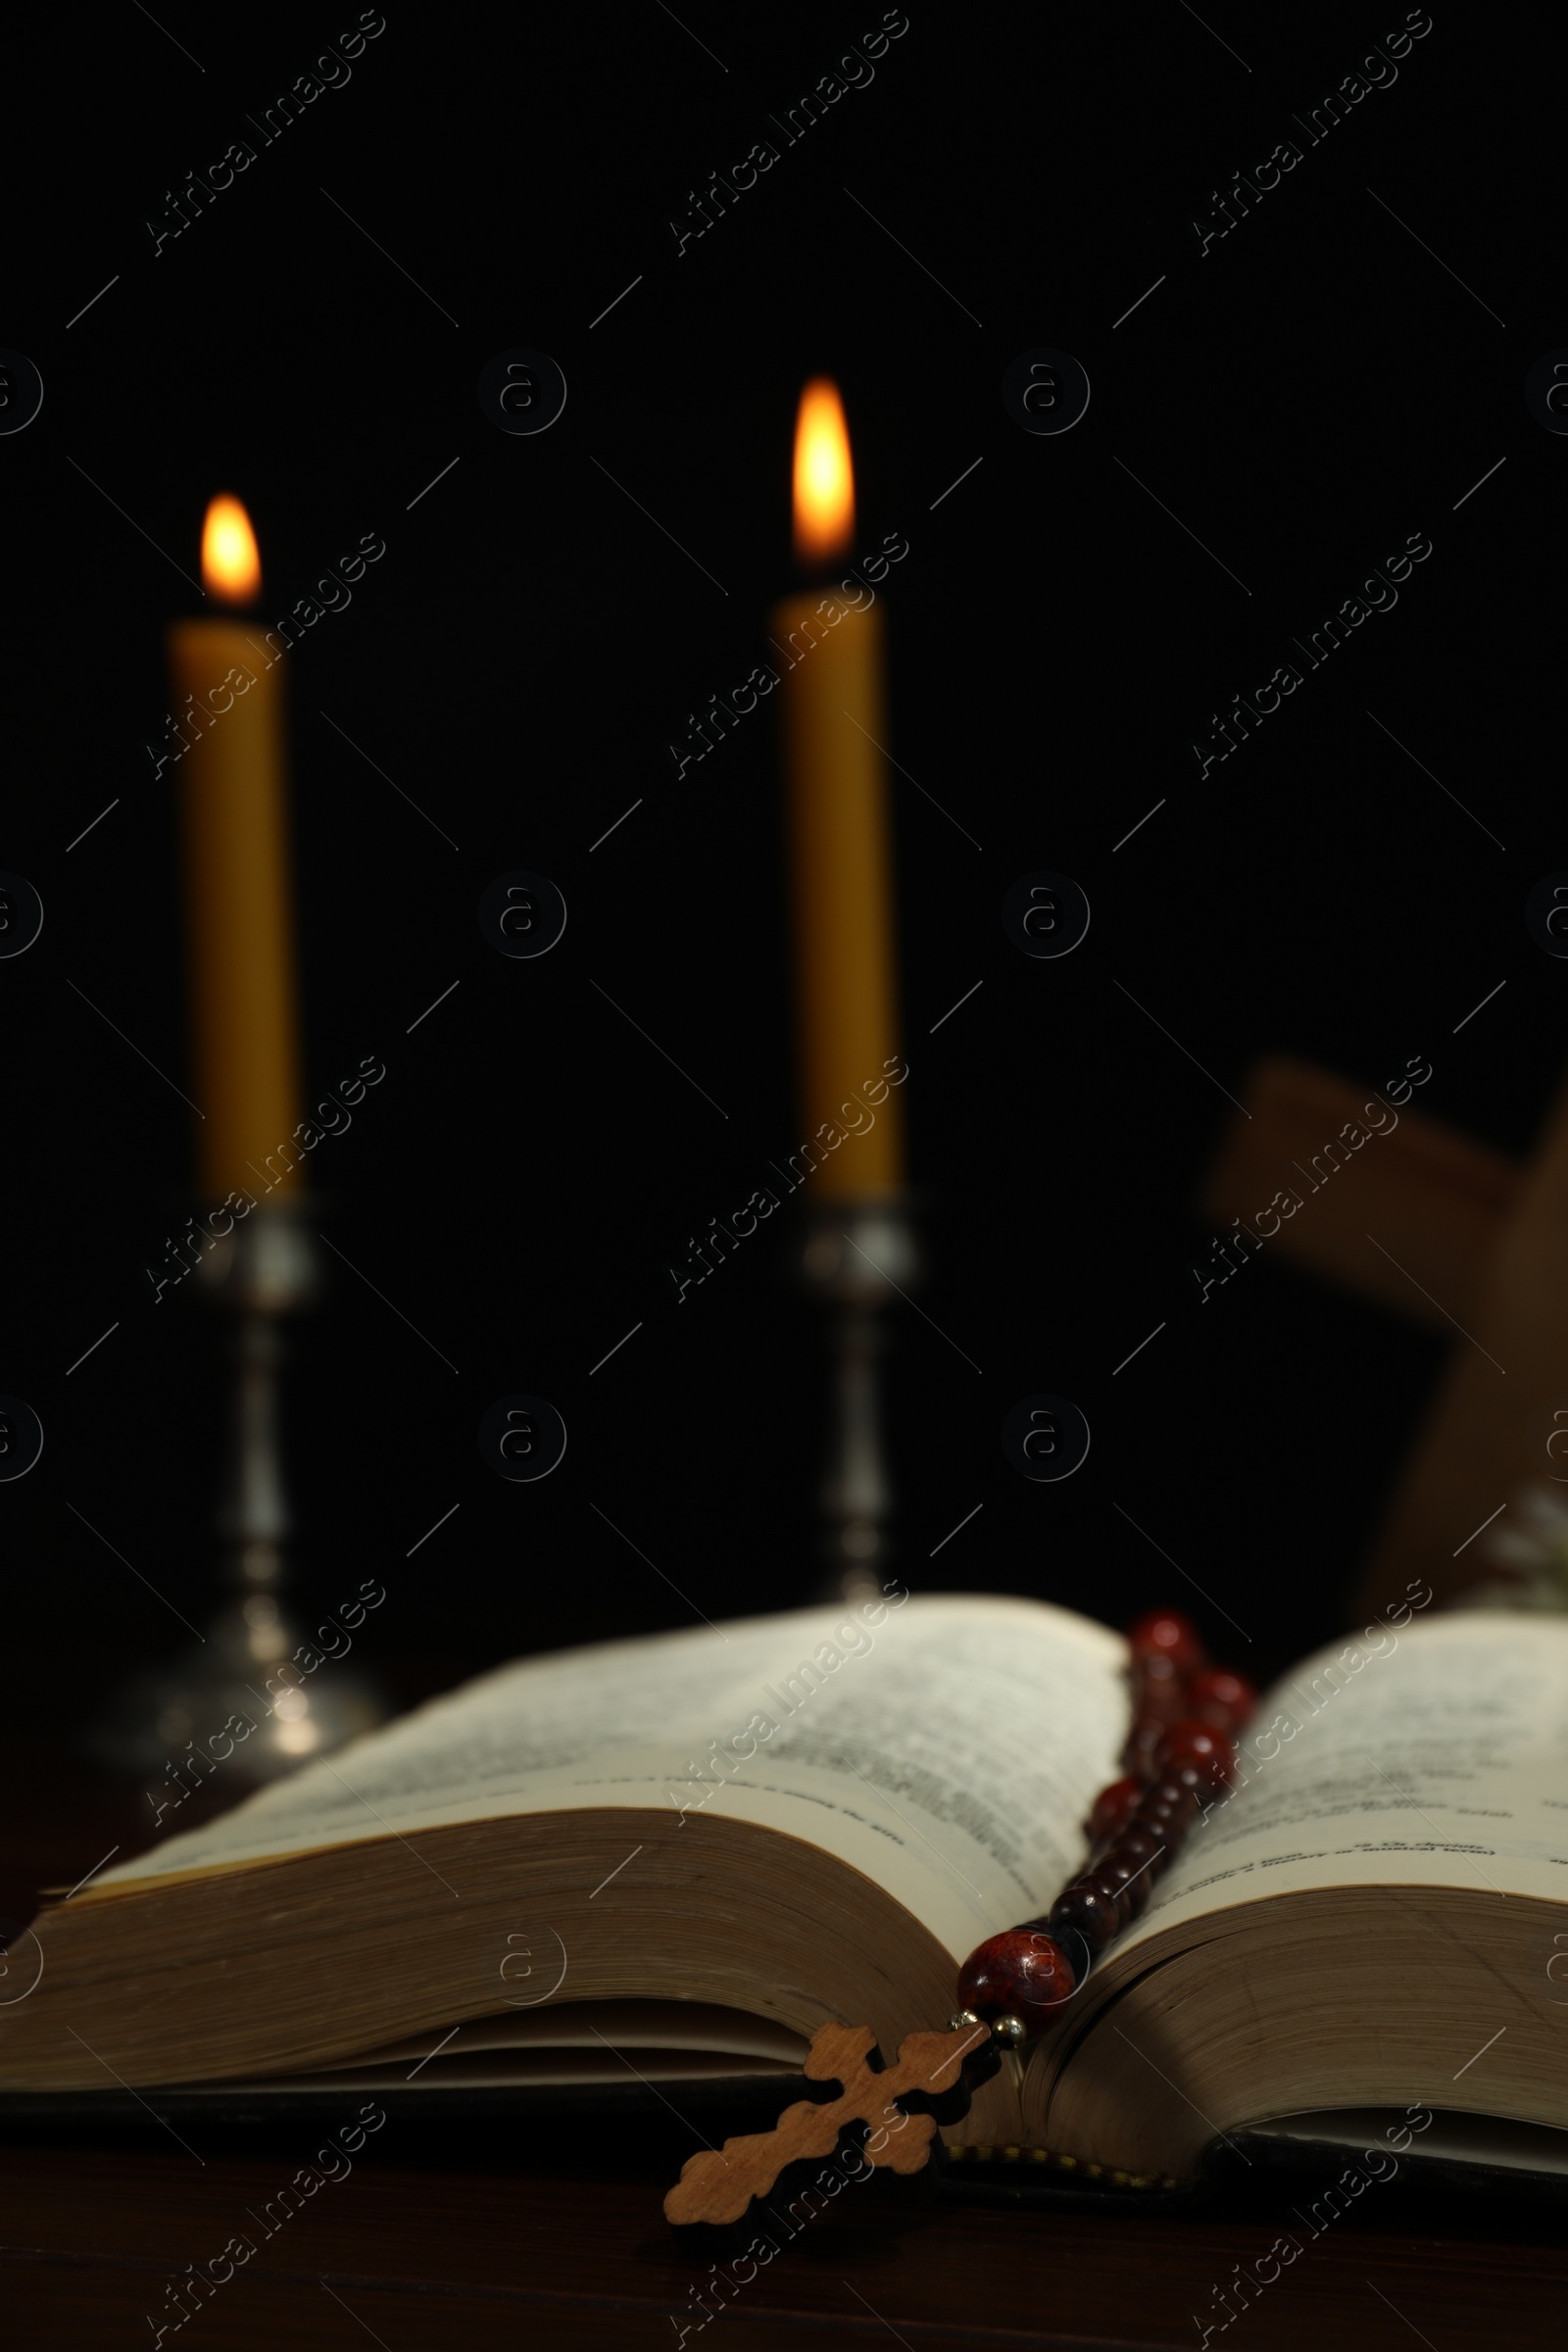 Photo of Cross, rosary beads, Bible and church candles on wooden table